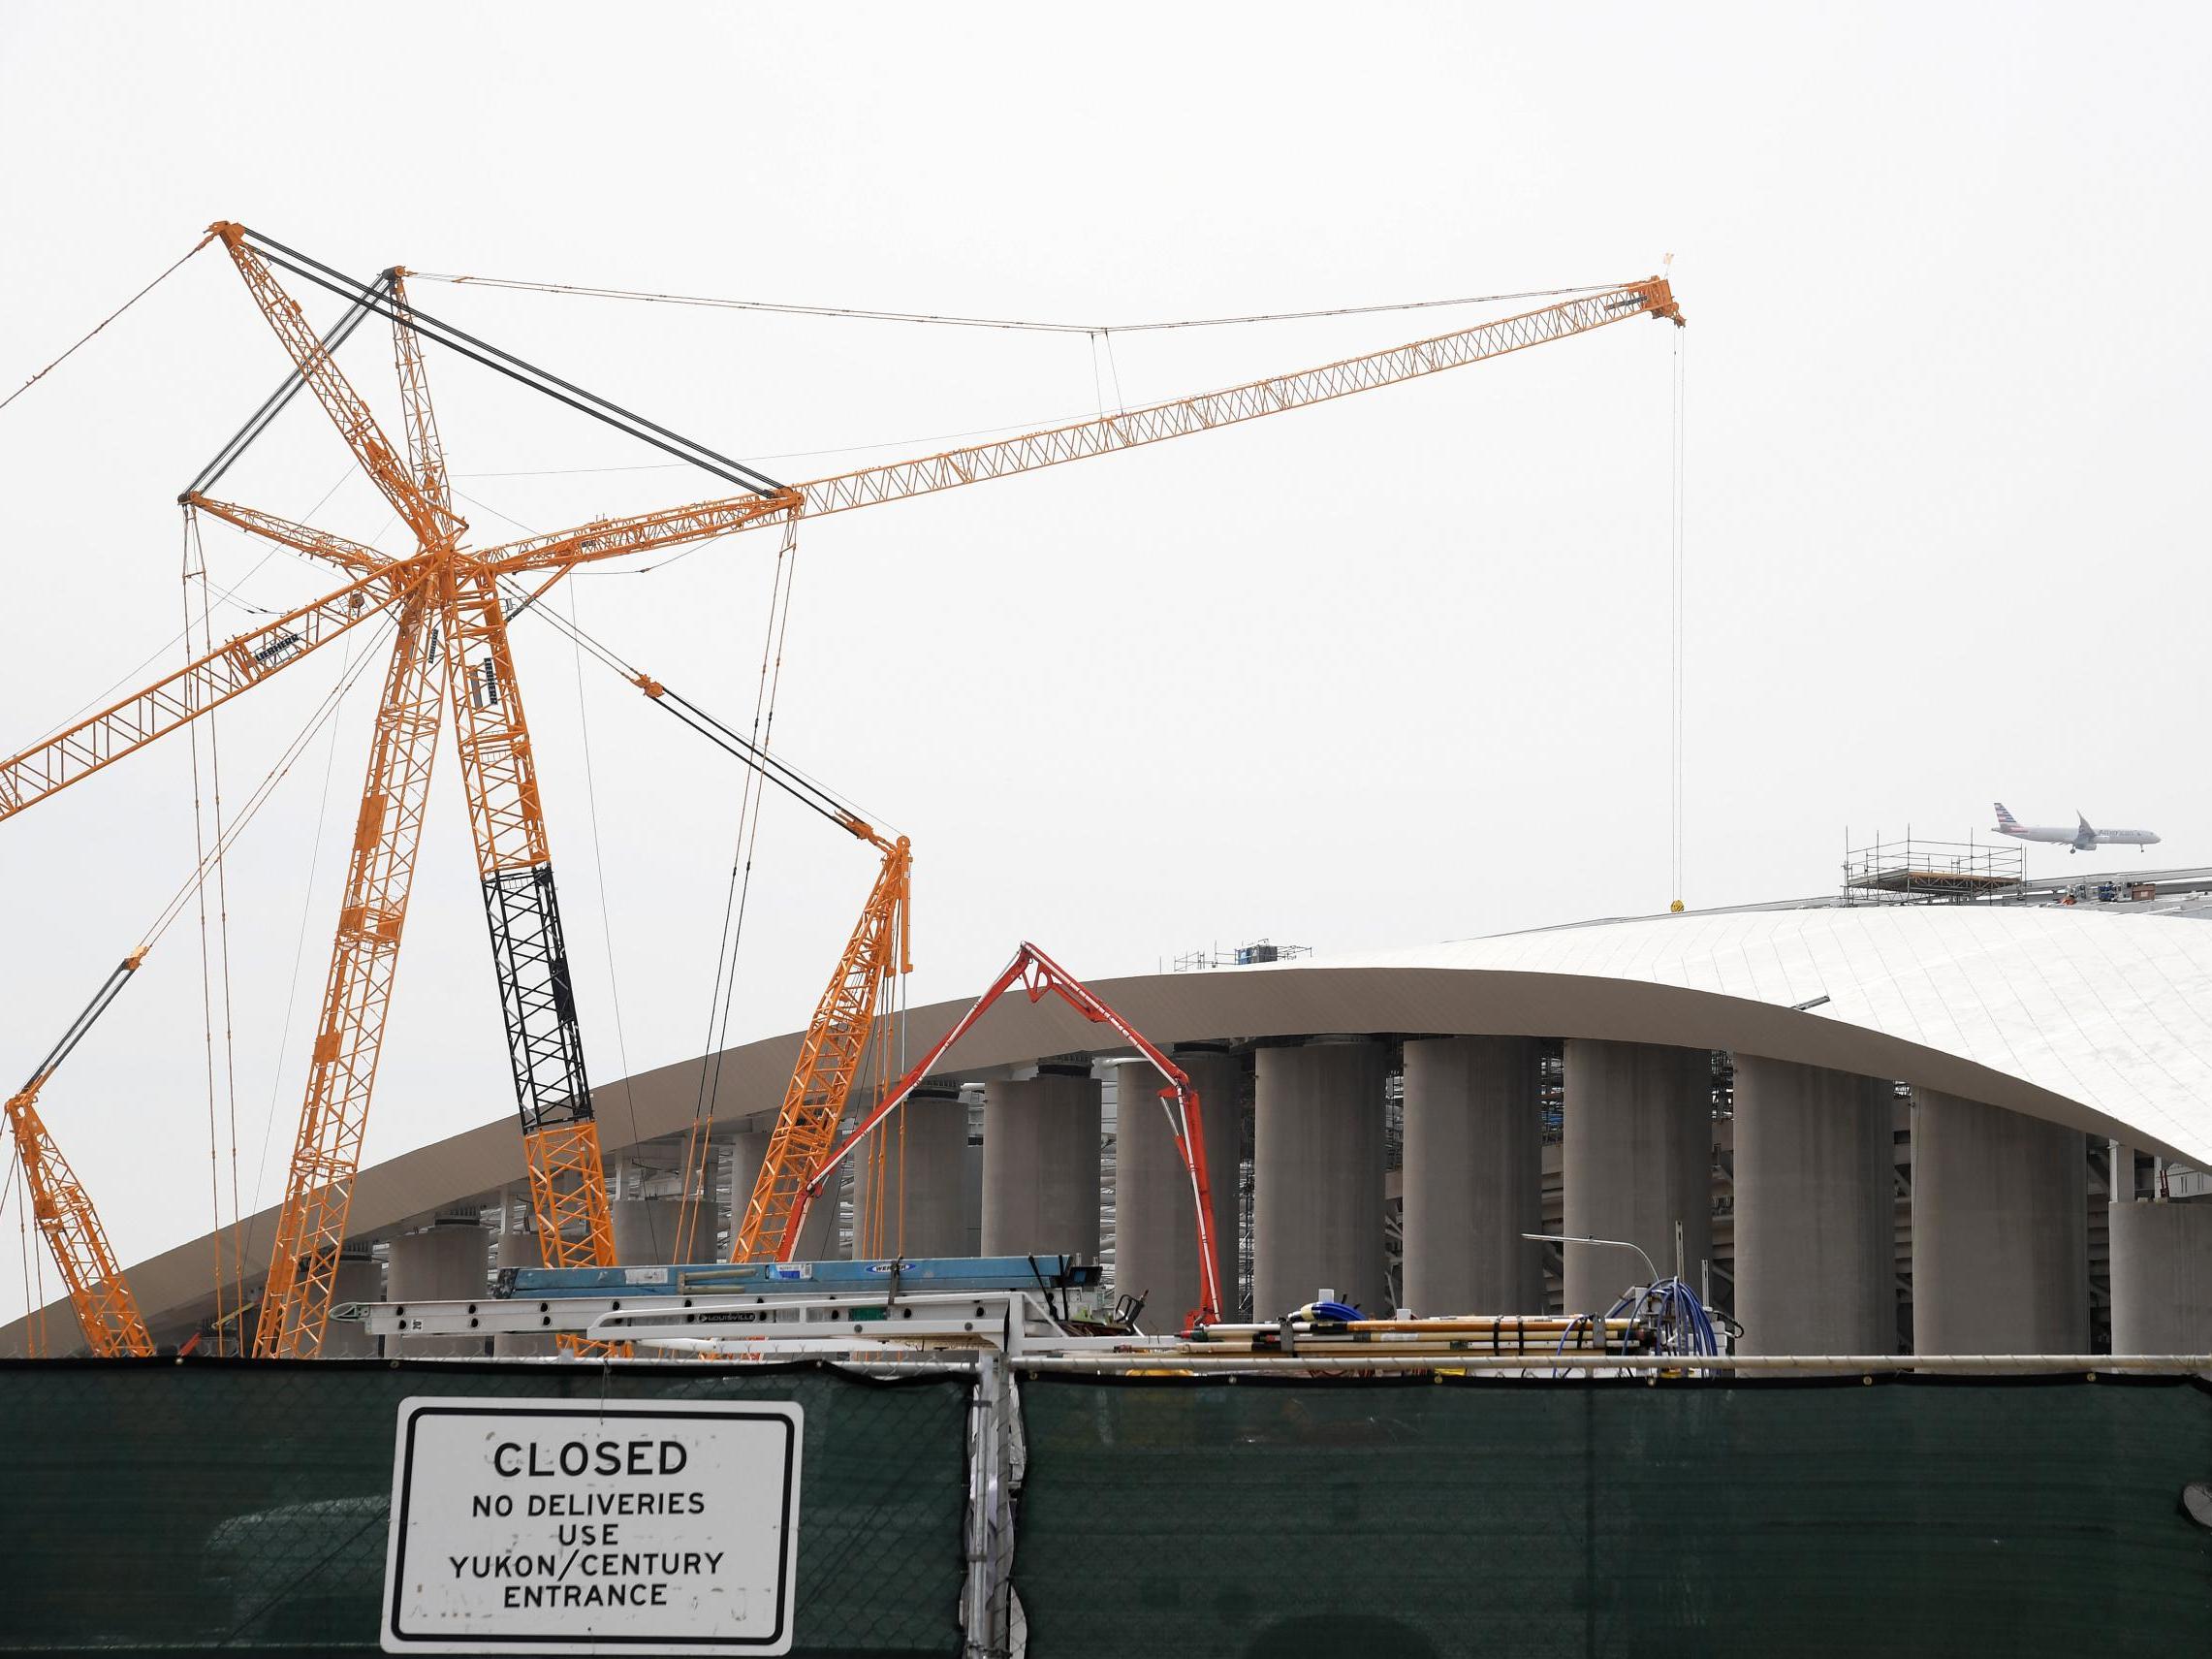 Construction at SoFi Stadium continues amidst the Covid-19 pandemic in Inglewood, California